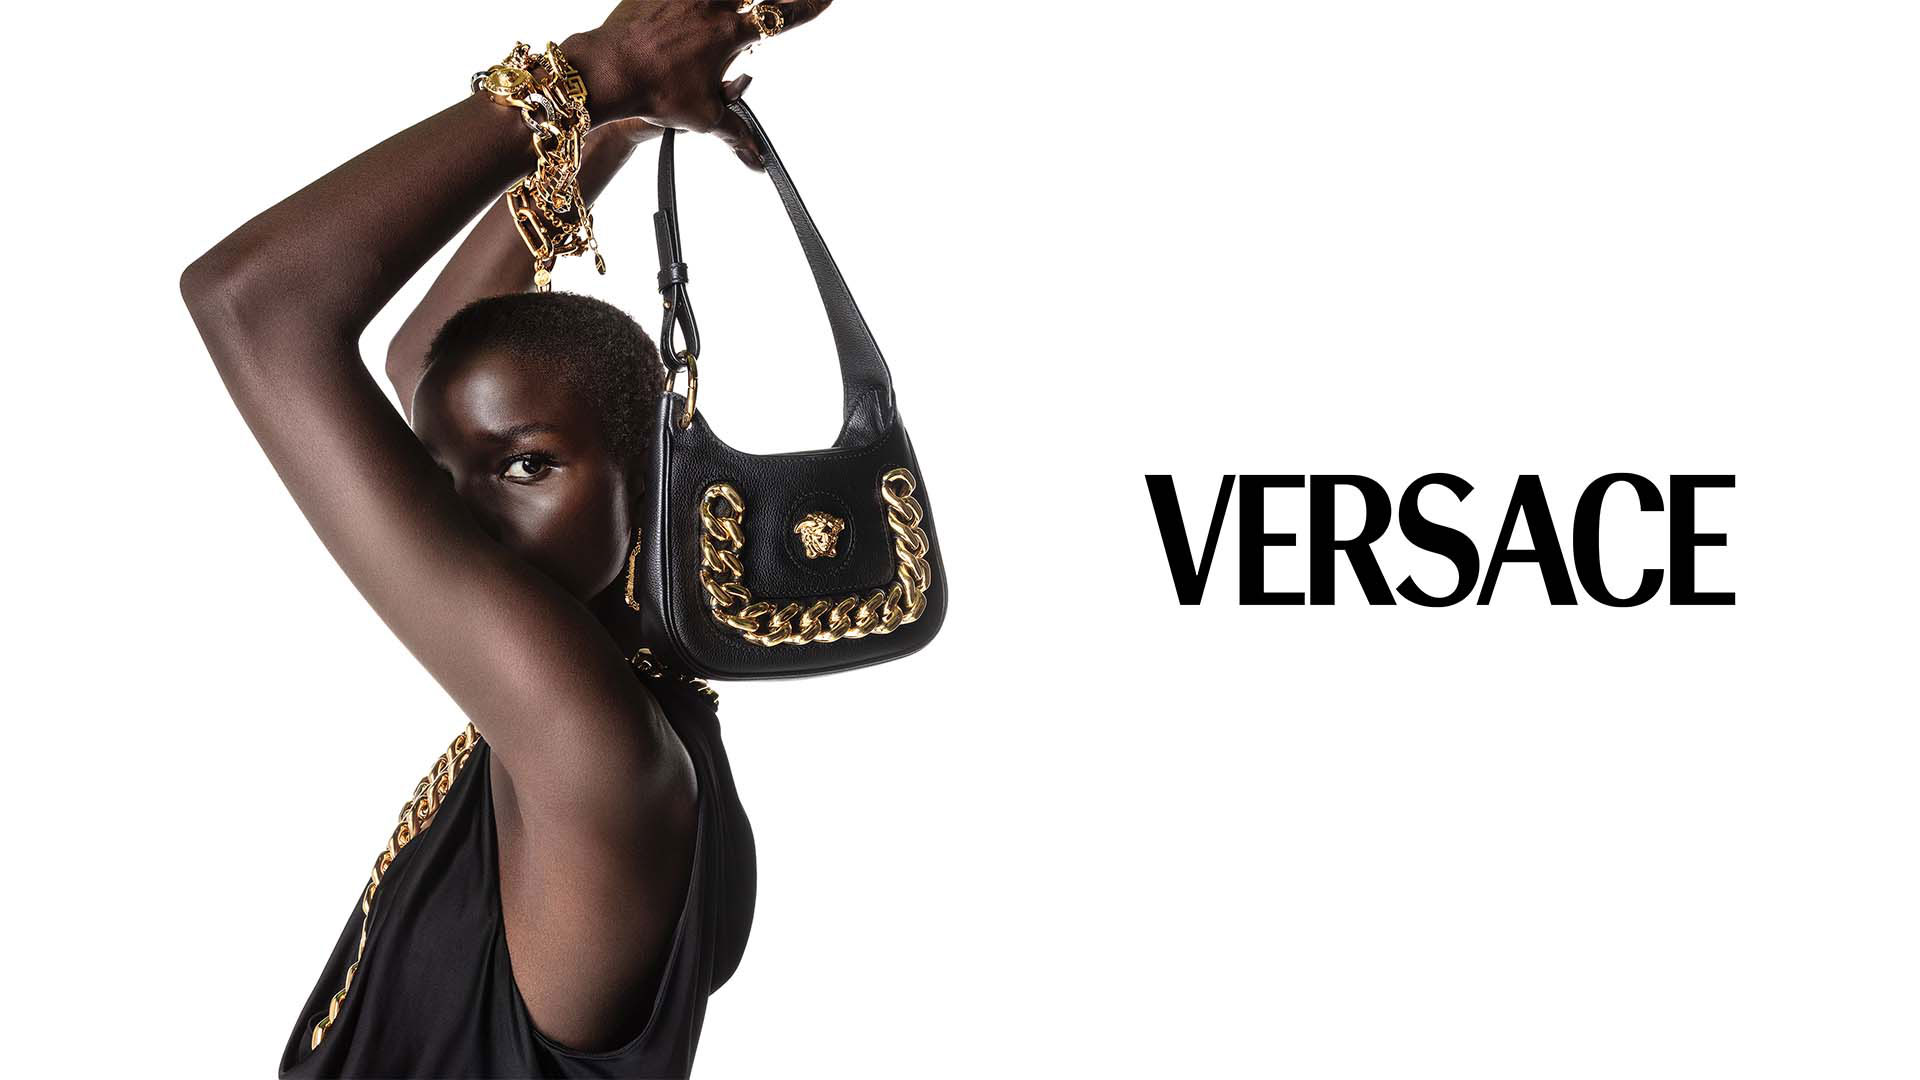 Versace women's totes bags sale | Shop online at THEBS [iKRIX]